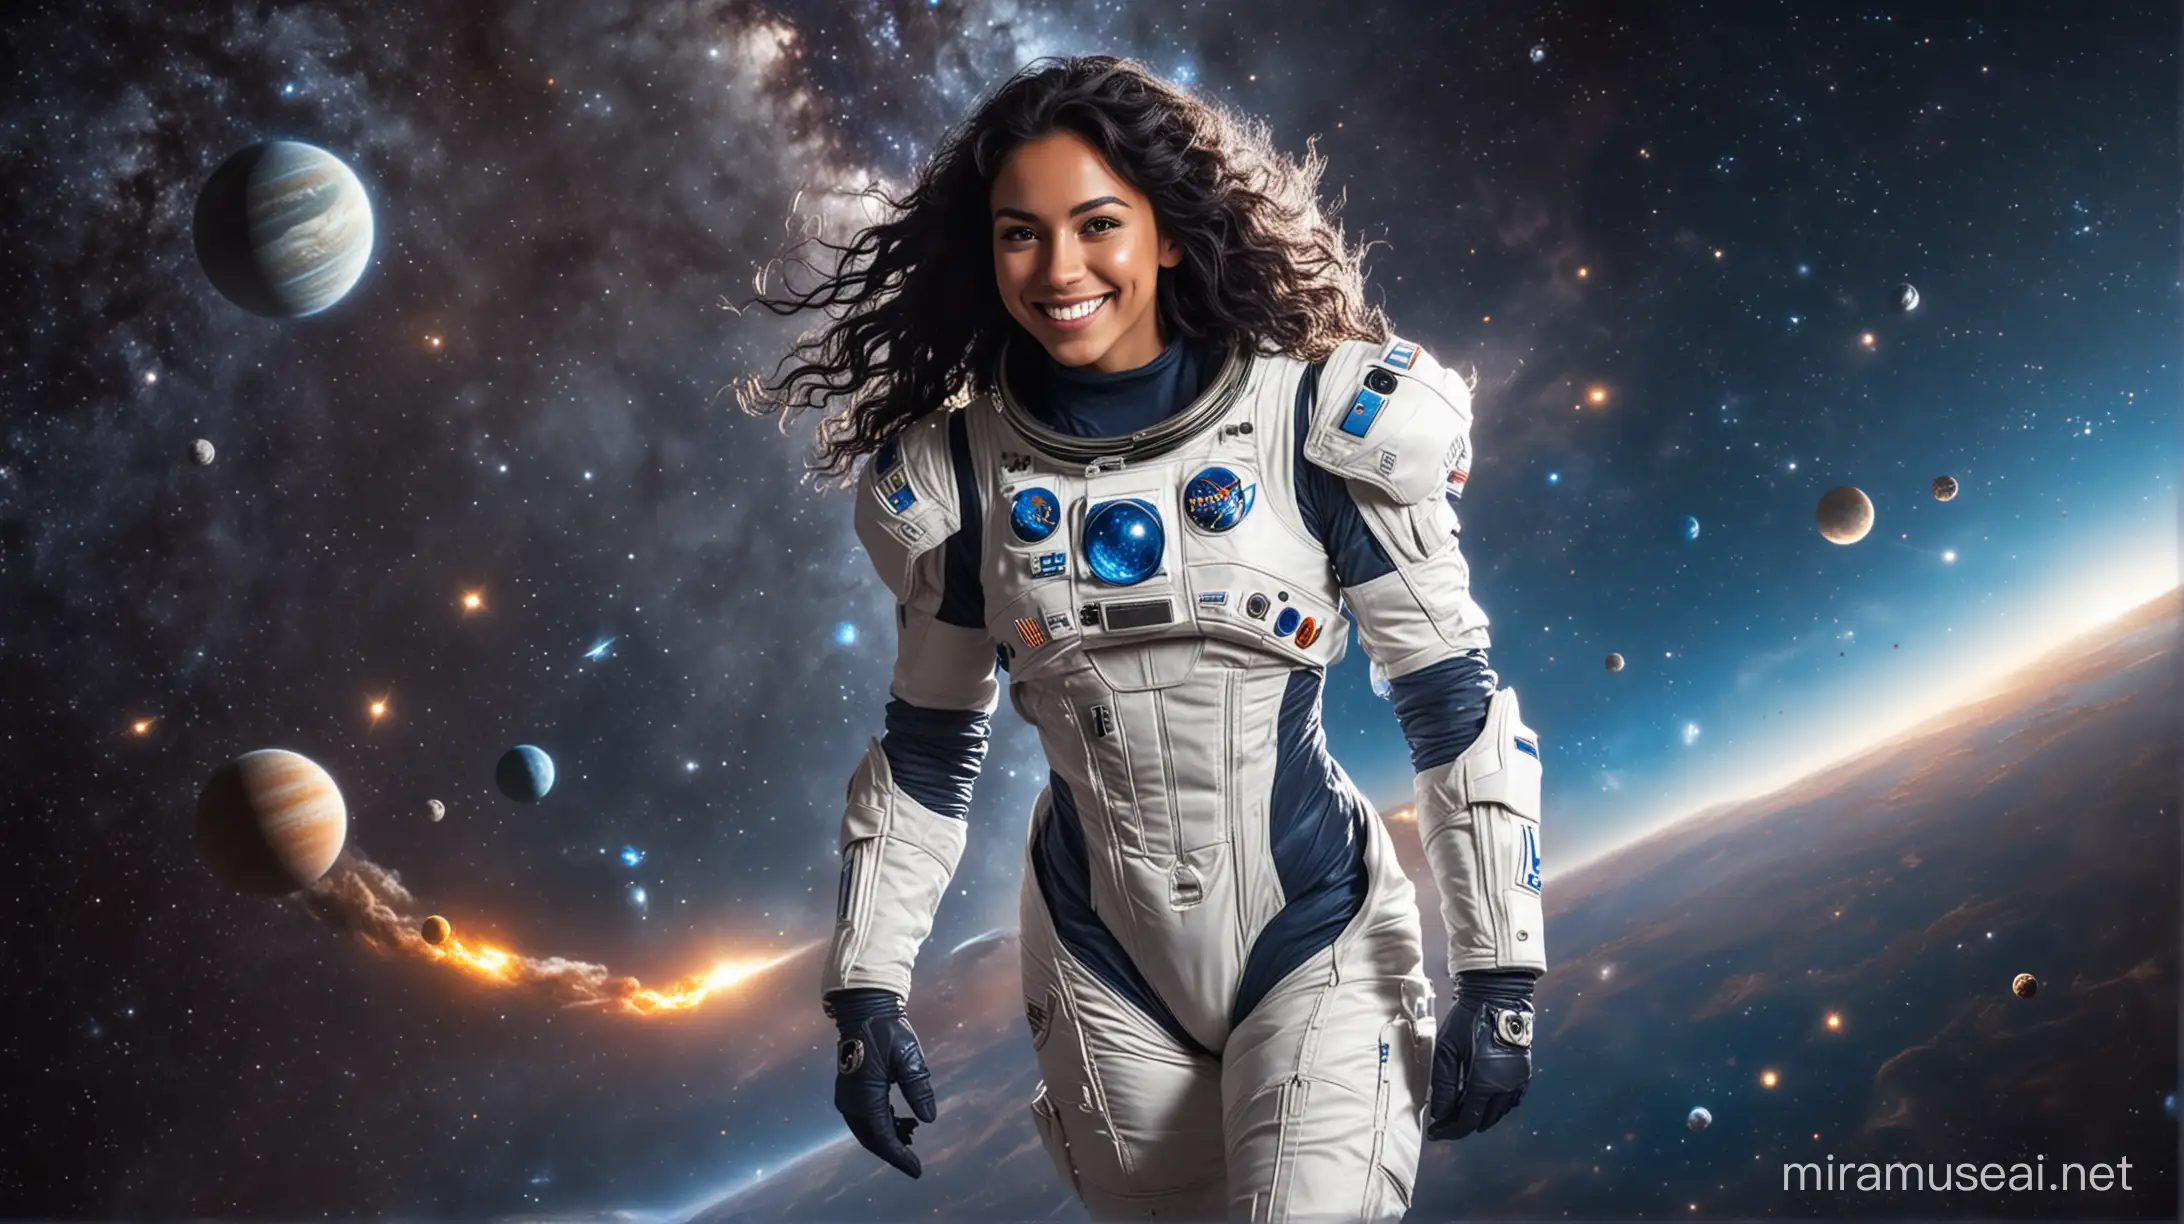 Smiling Latin Woman in Bright Glowing Spacesuit Against Burning Planets